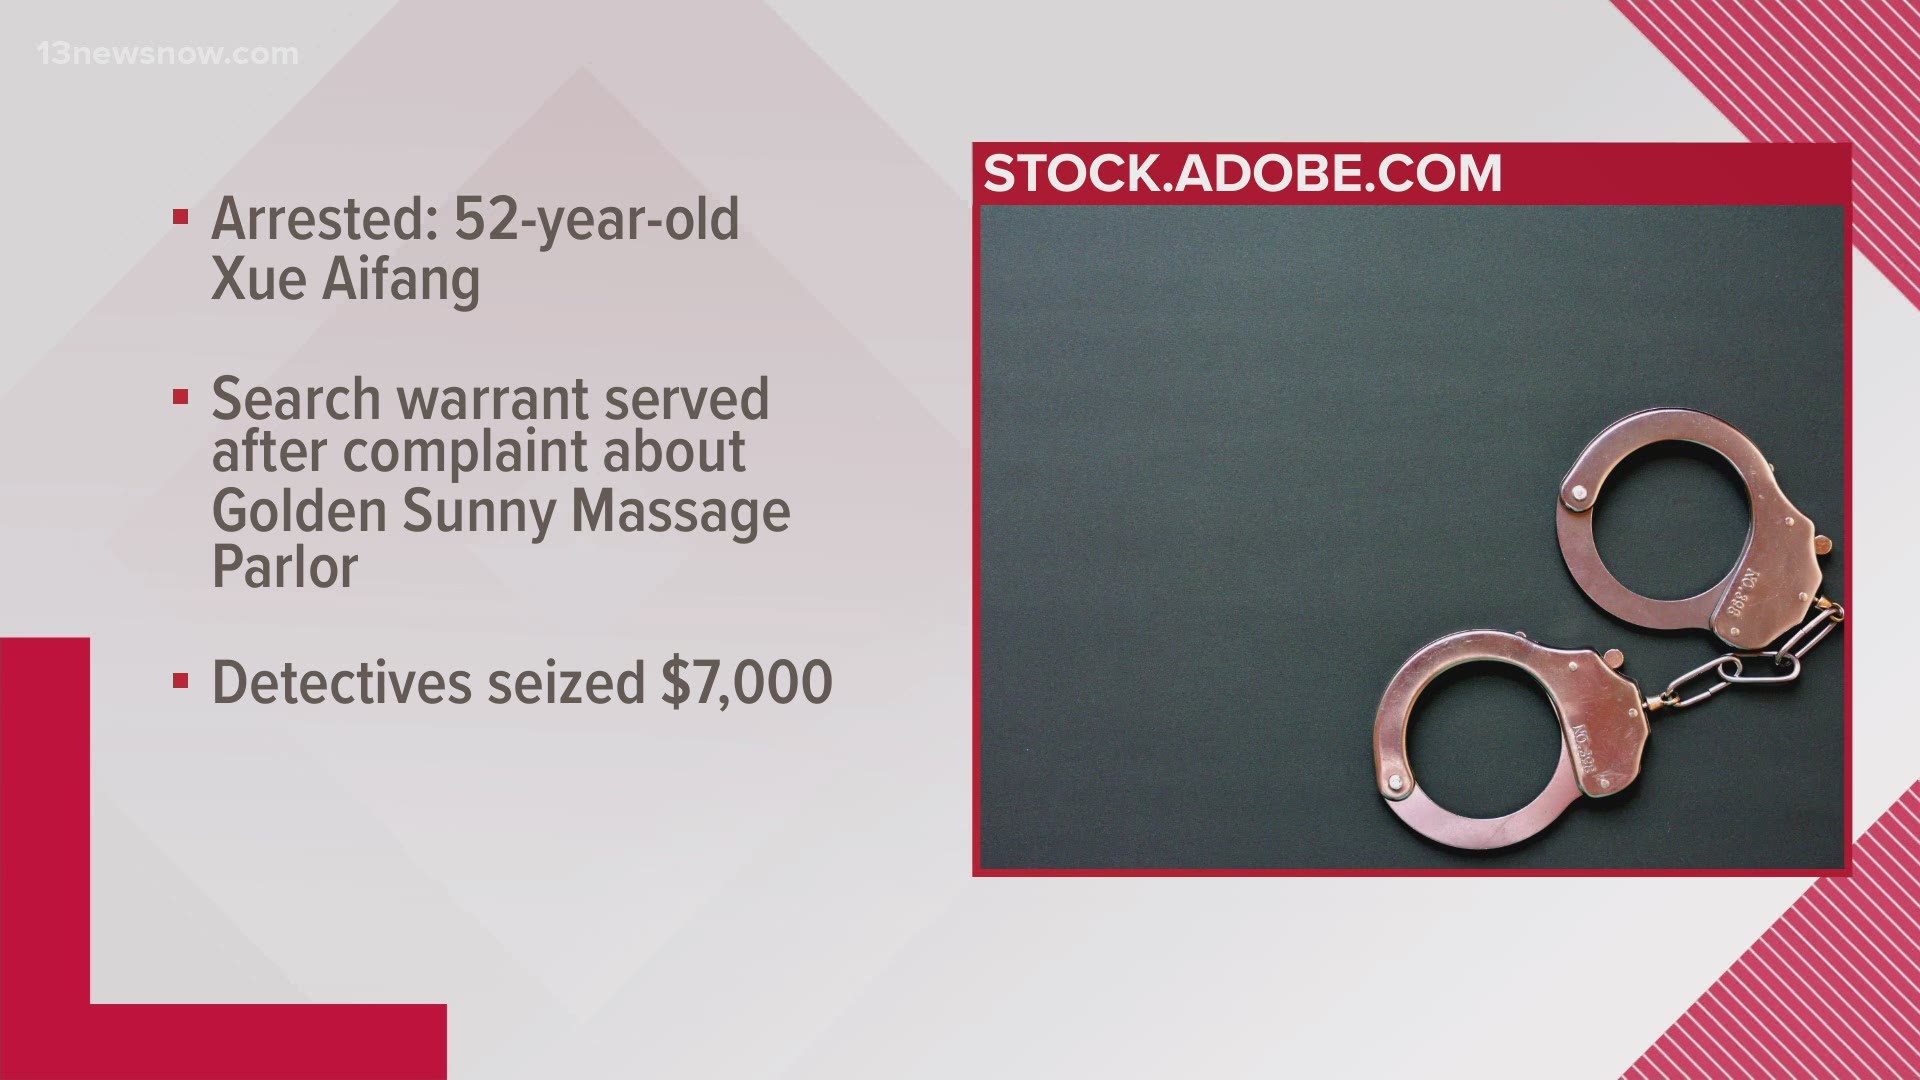 A 52-year-old was arrested and charged with prostitution after someone complained about where they worked, the Golden Sunny Massage Parlor.